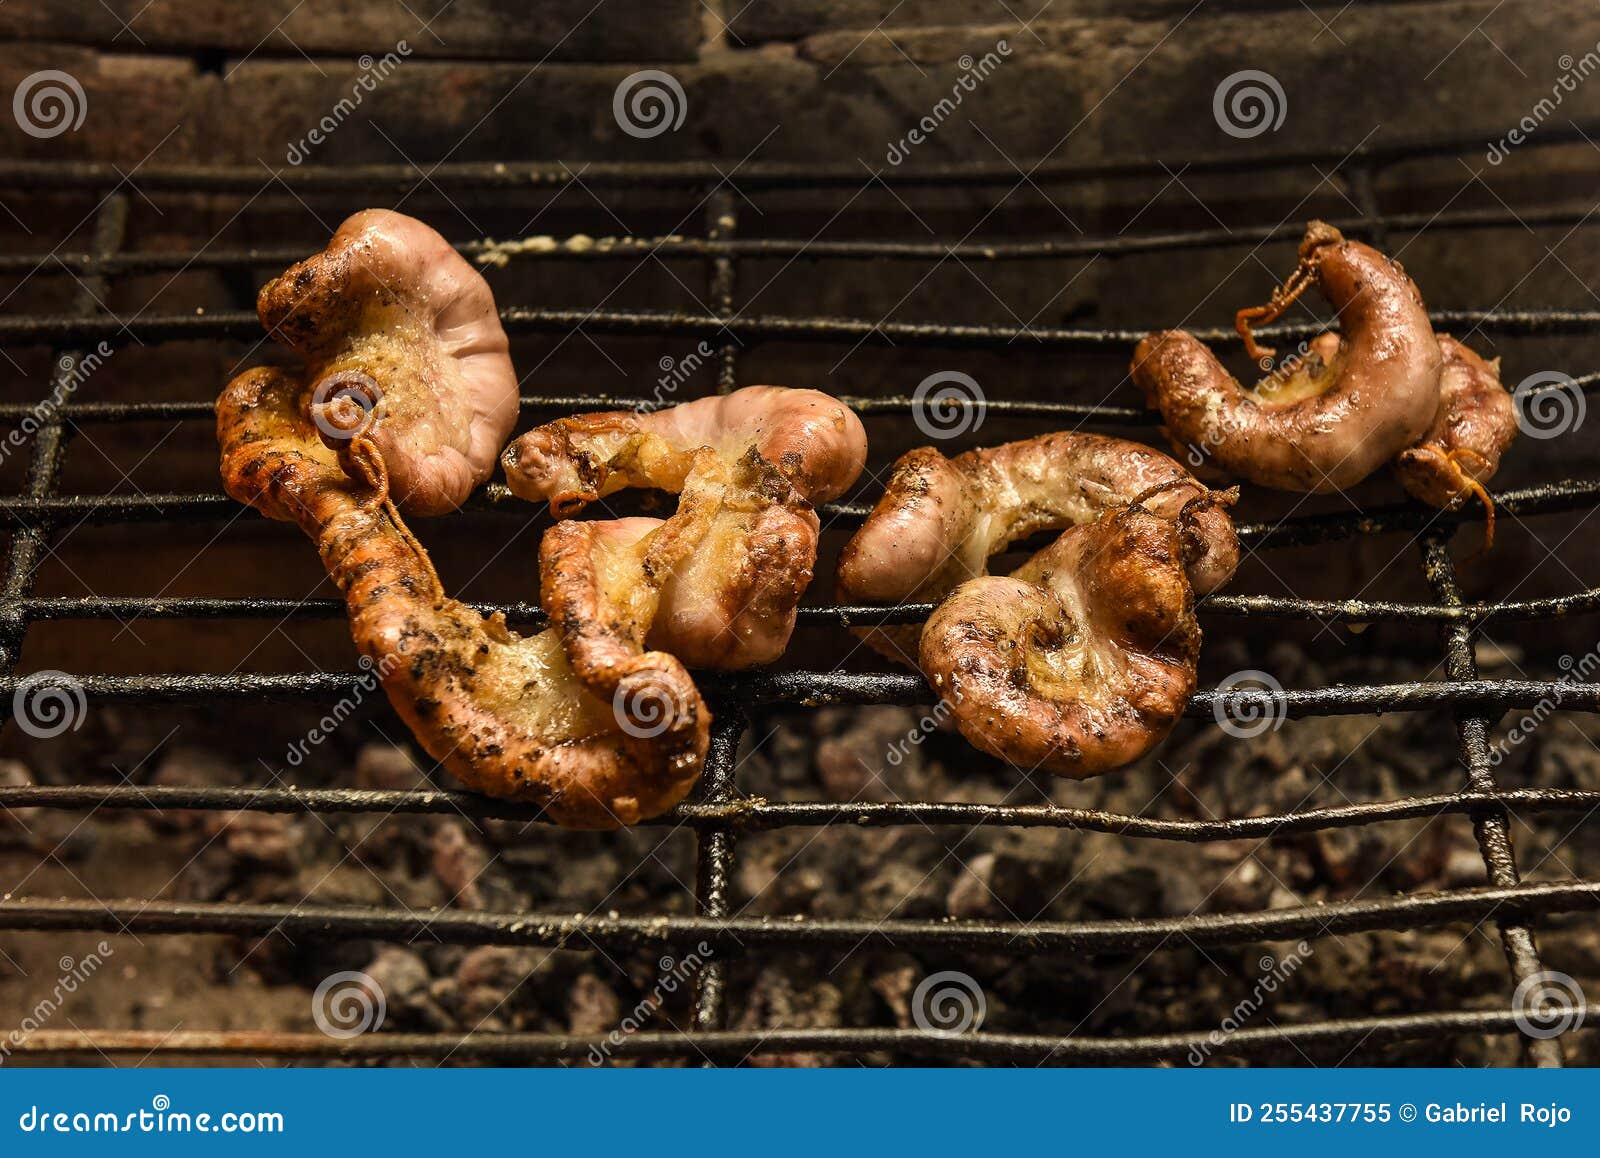 Cow Bowels Presented on a Wooden Board with Ingredients, Stock Image ...